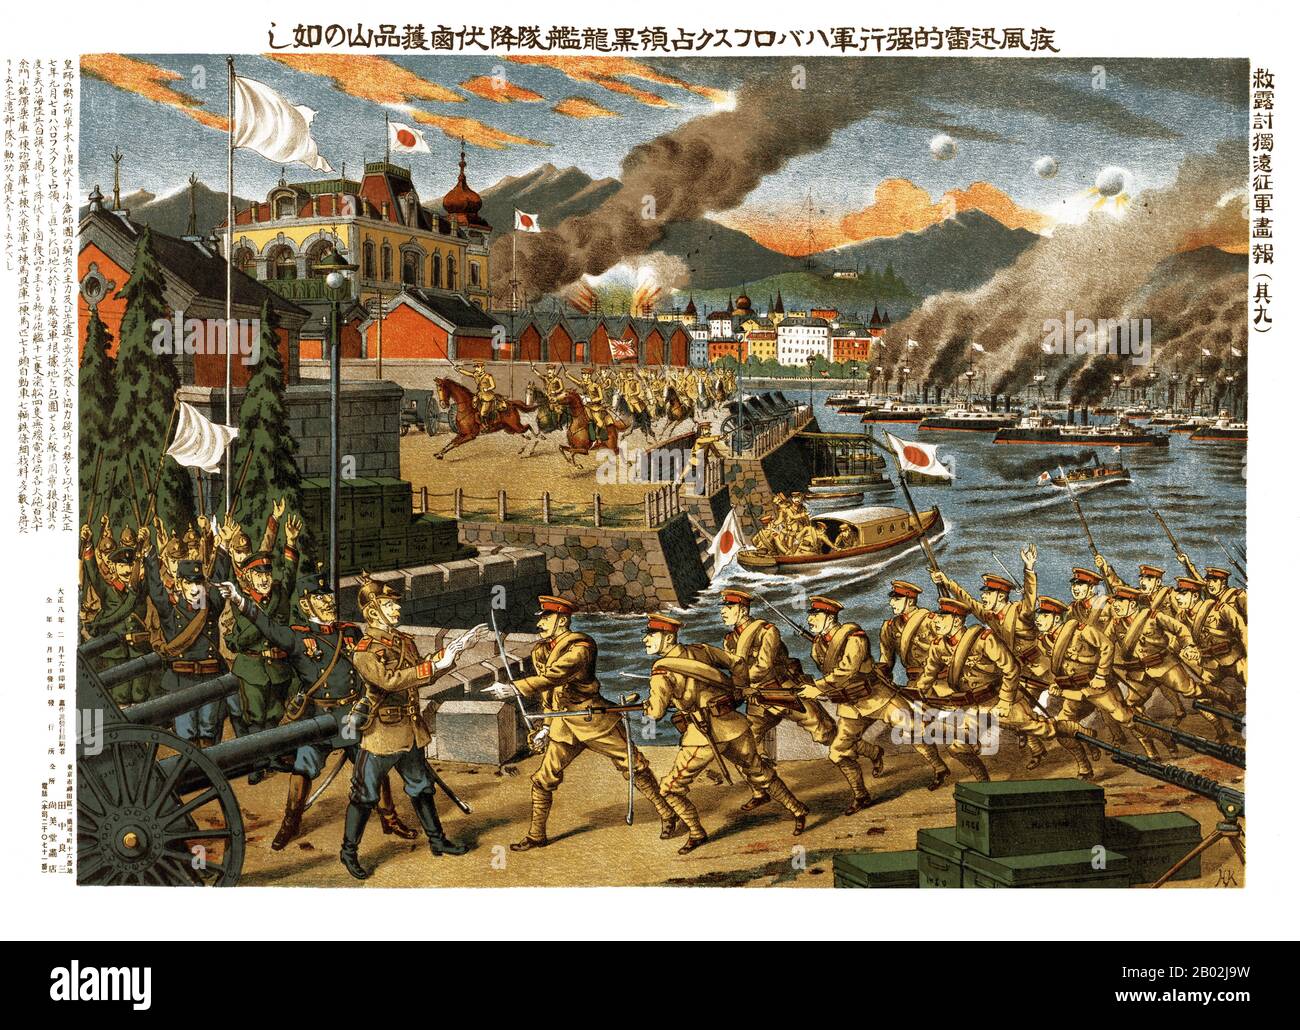 The Siberian Intervention (シベリア出兵 - Shiberia Shuppei), or the Siberian Expedition of 1918–1922 was the dispatch of troops of the Entente powers to the Russian Maritime Provinces as part of a larger effort by the western powers and Japan to support White Russian forces against the Bolshevik Red Army in the final year of World War I and during the Russian Civil War.  The Imperial Japanese Army continued to occupy Siberia even after other Allied forces had withdrawn in 1920. Stock Photo